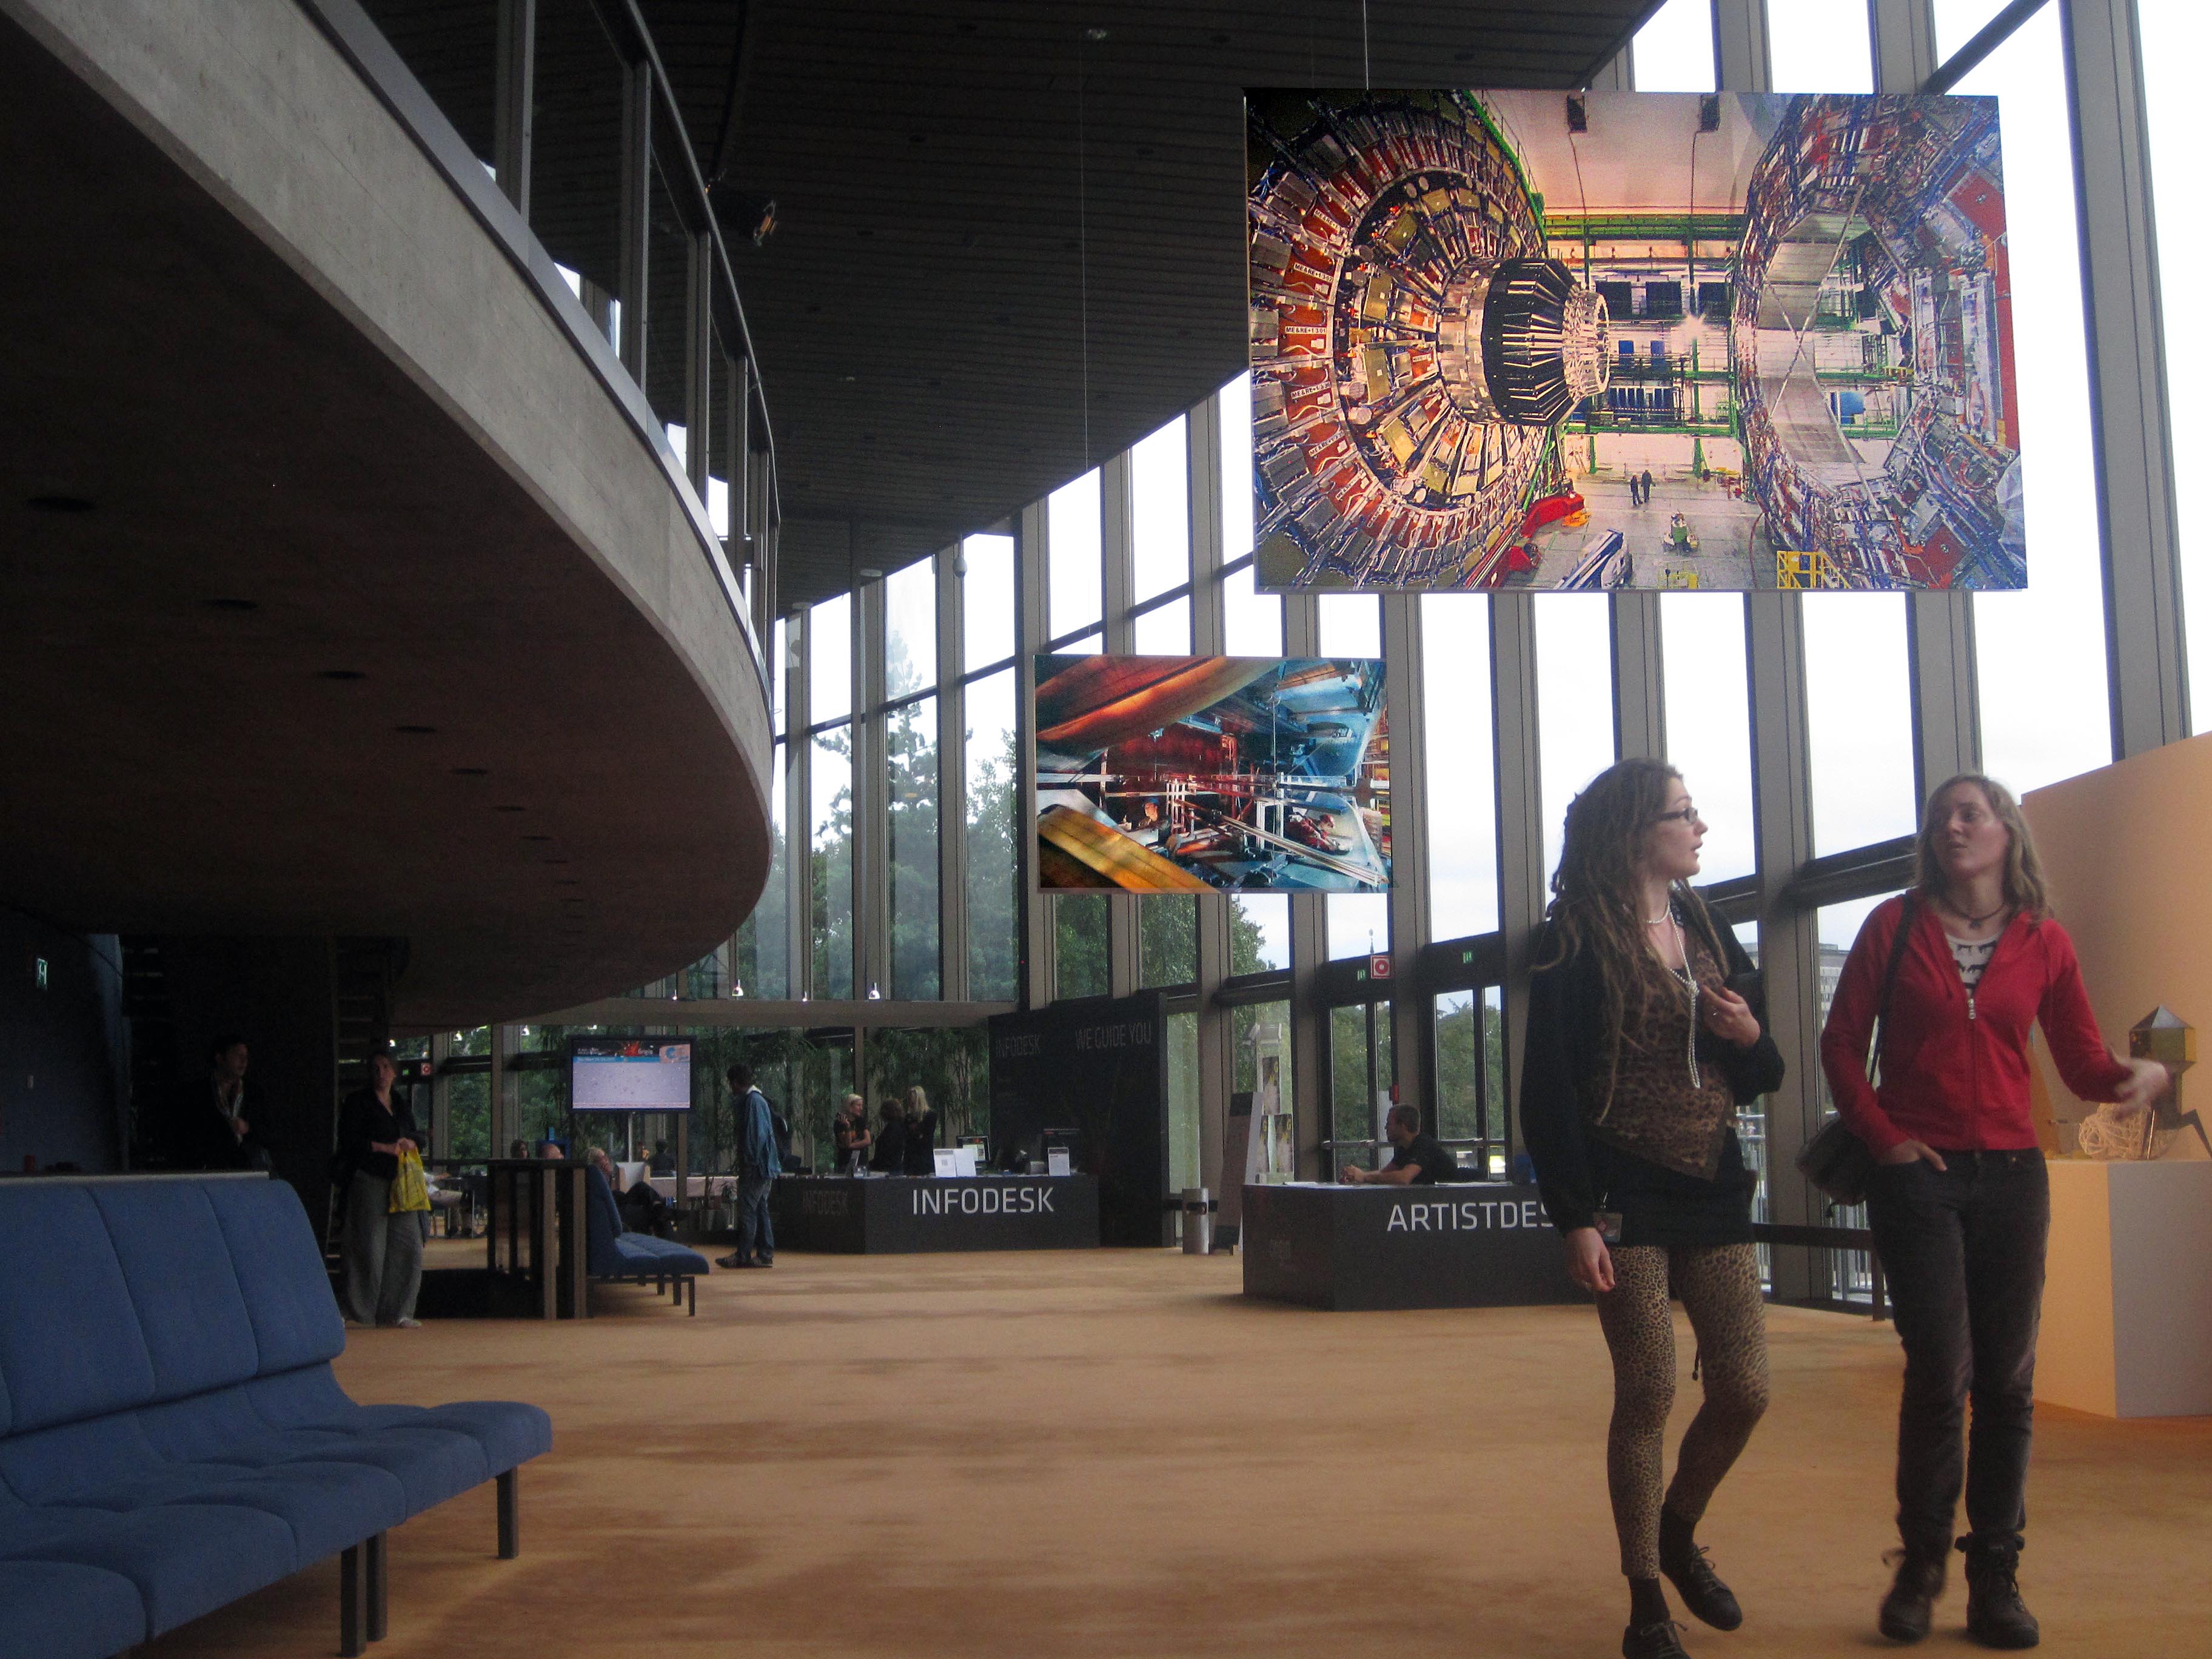 The corridor at Ars Electronica during the festival